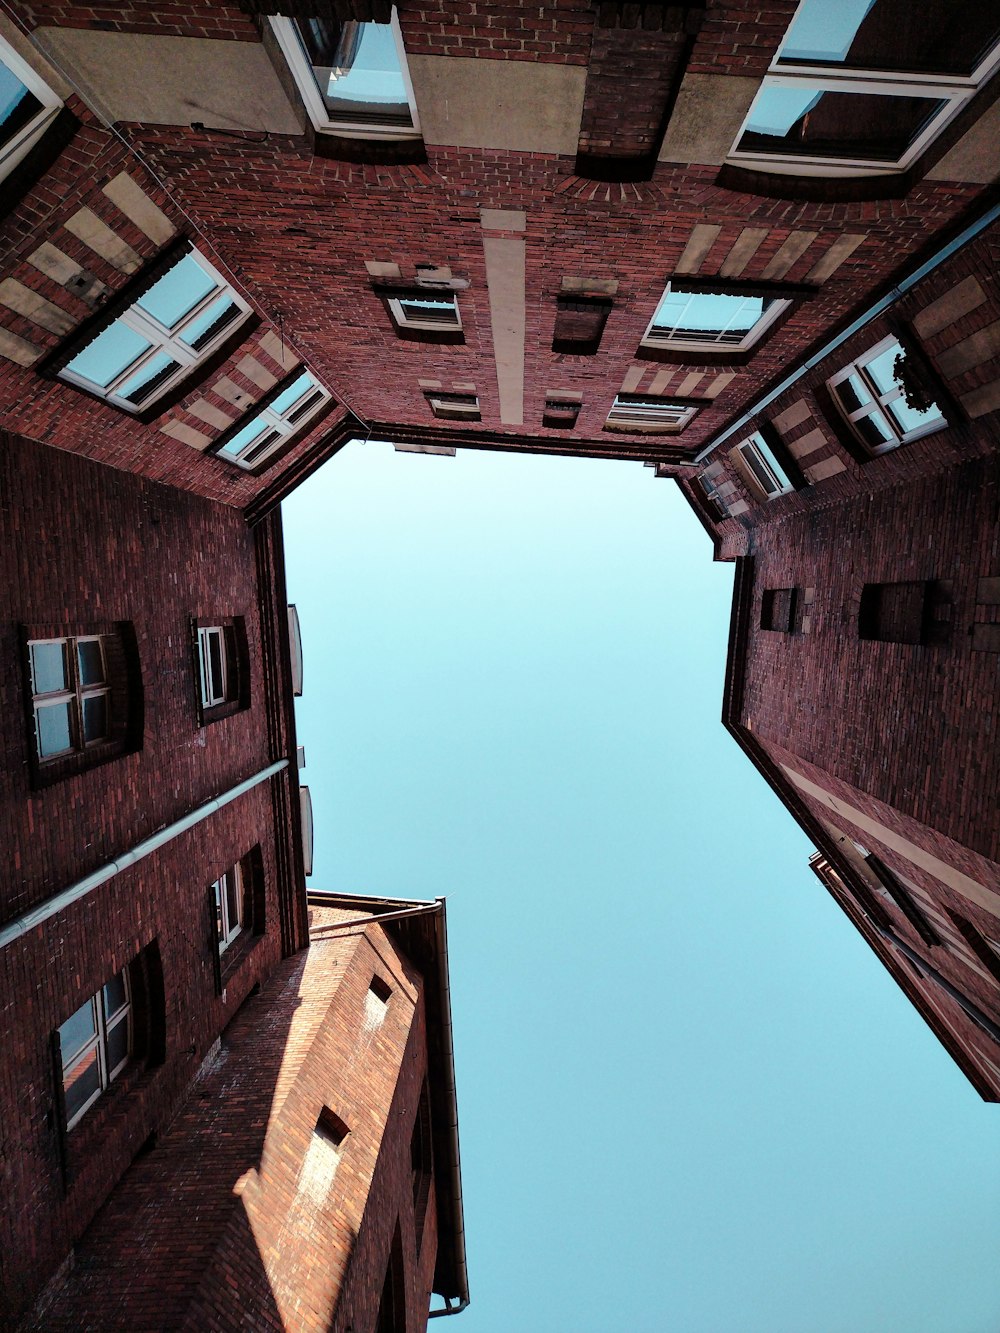 a view looking up at a building